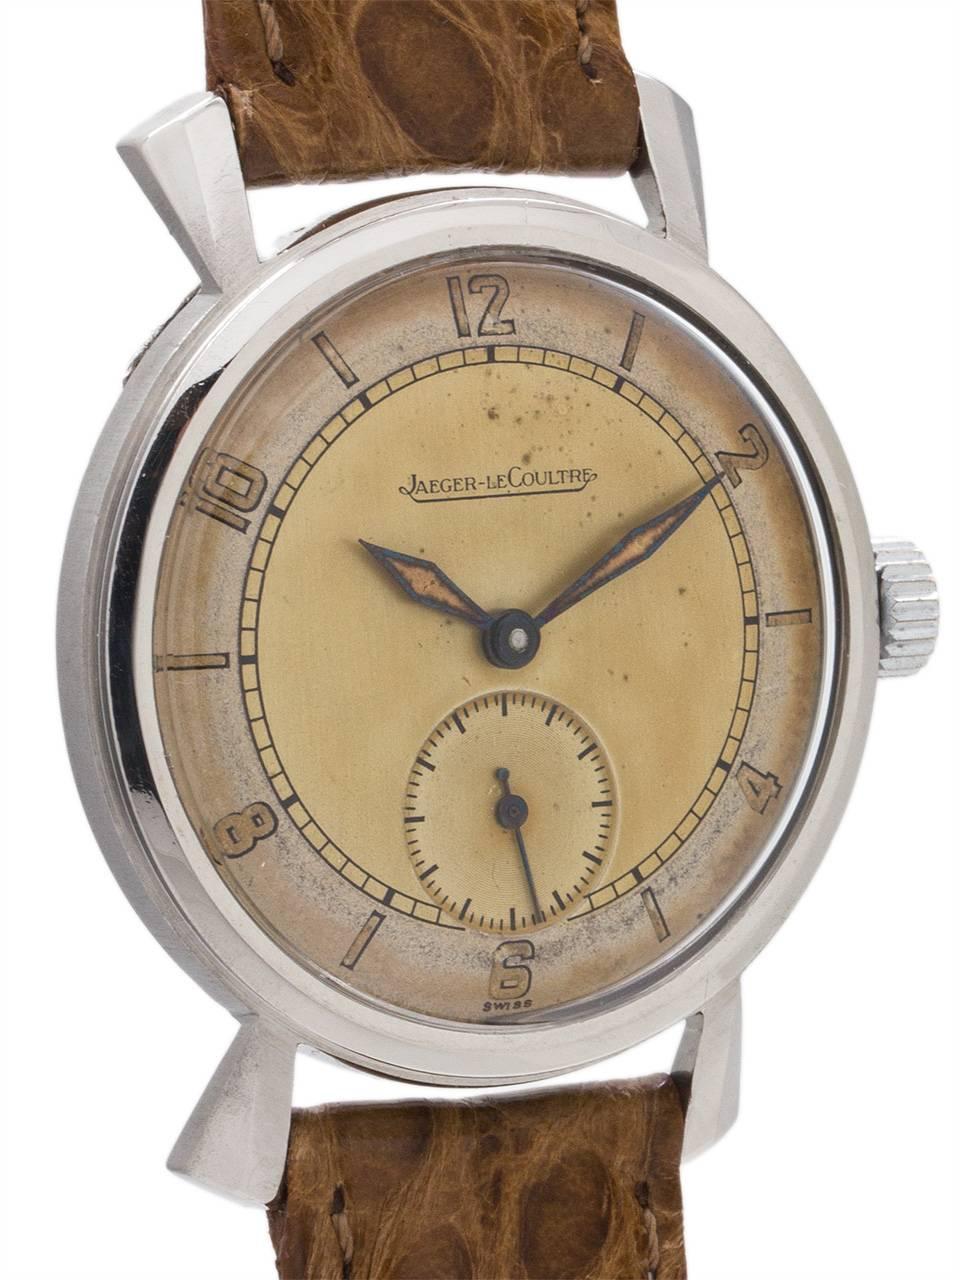 Retro Jaeger-LeCoultre Stainless Steel Dress model Manual Wind Wristwatch, circa 1940s